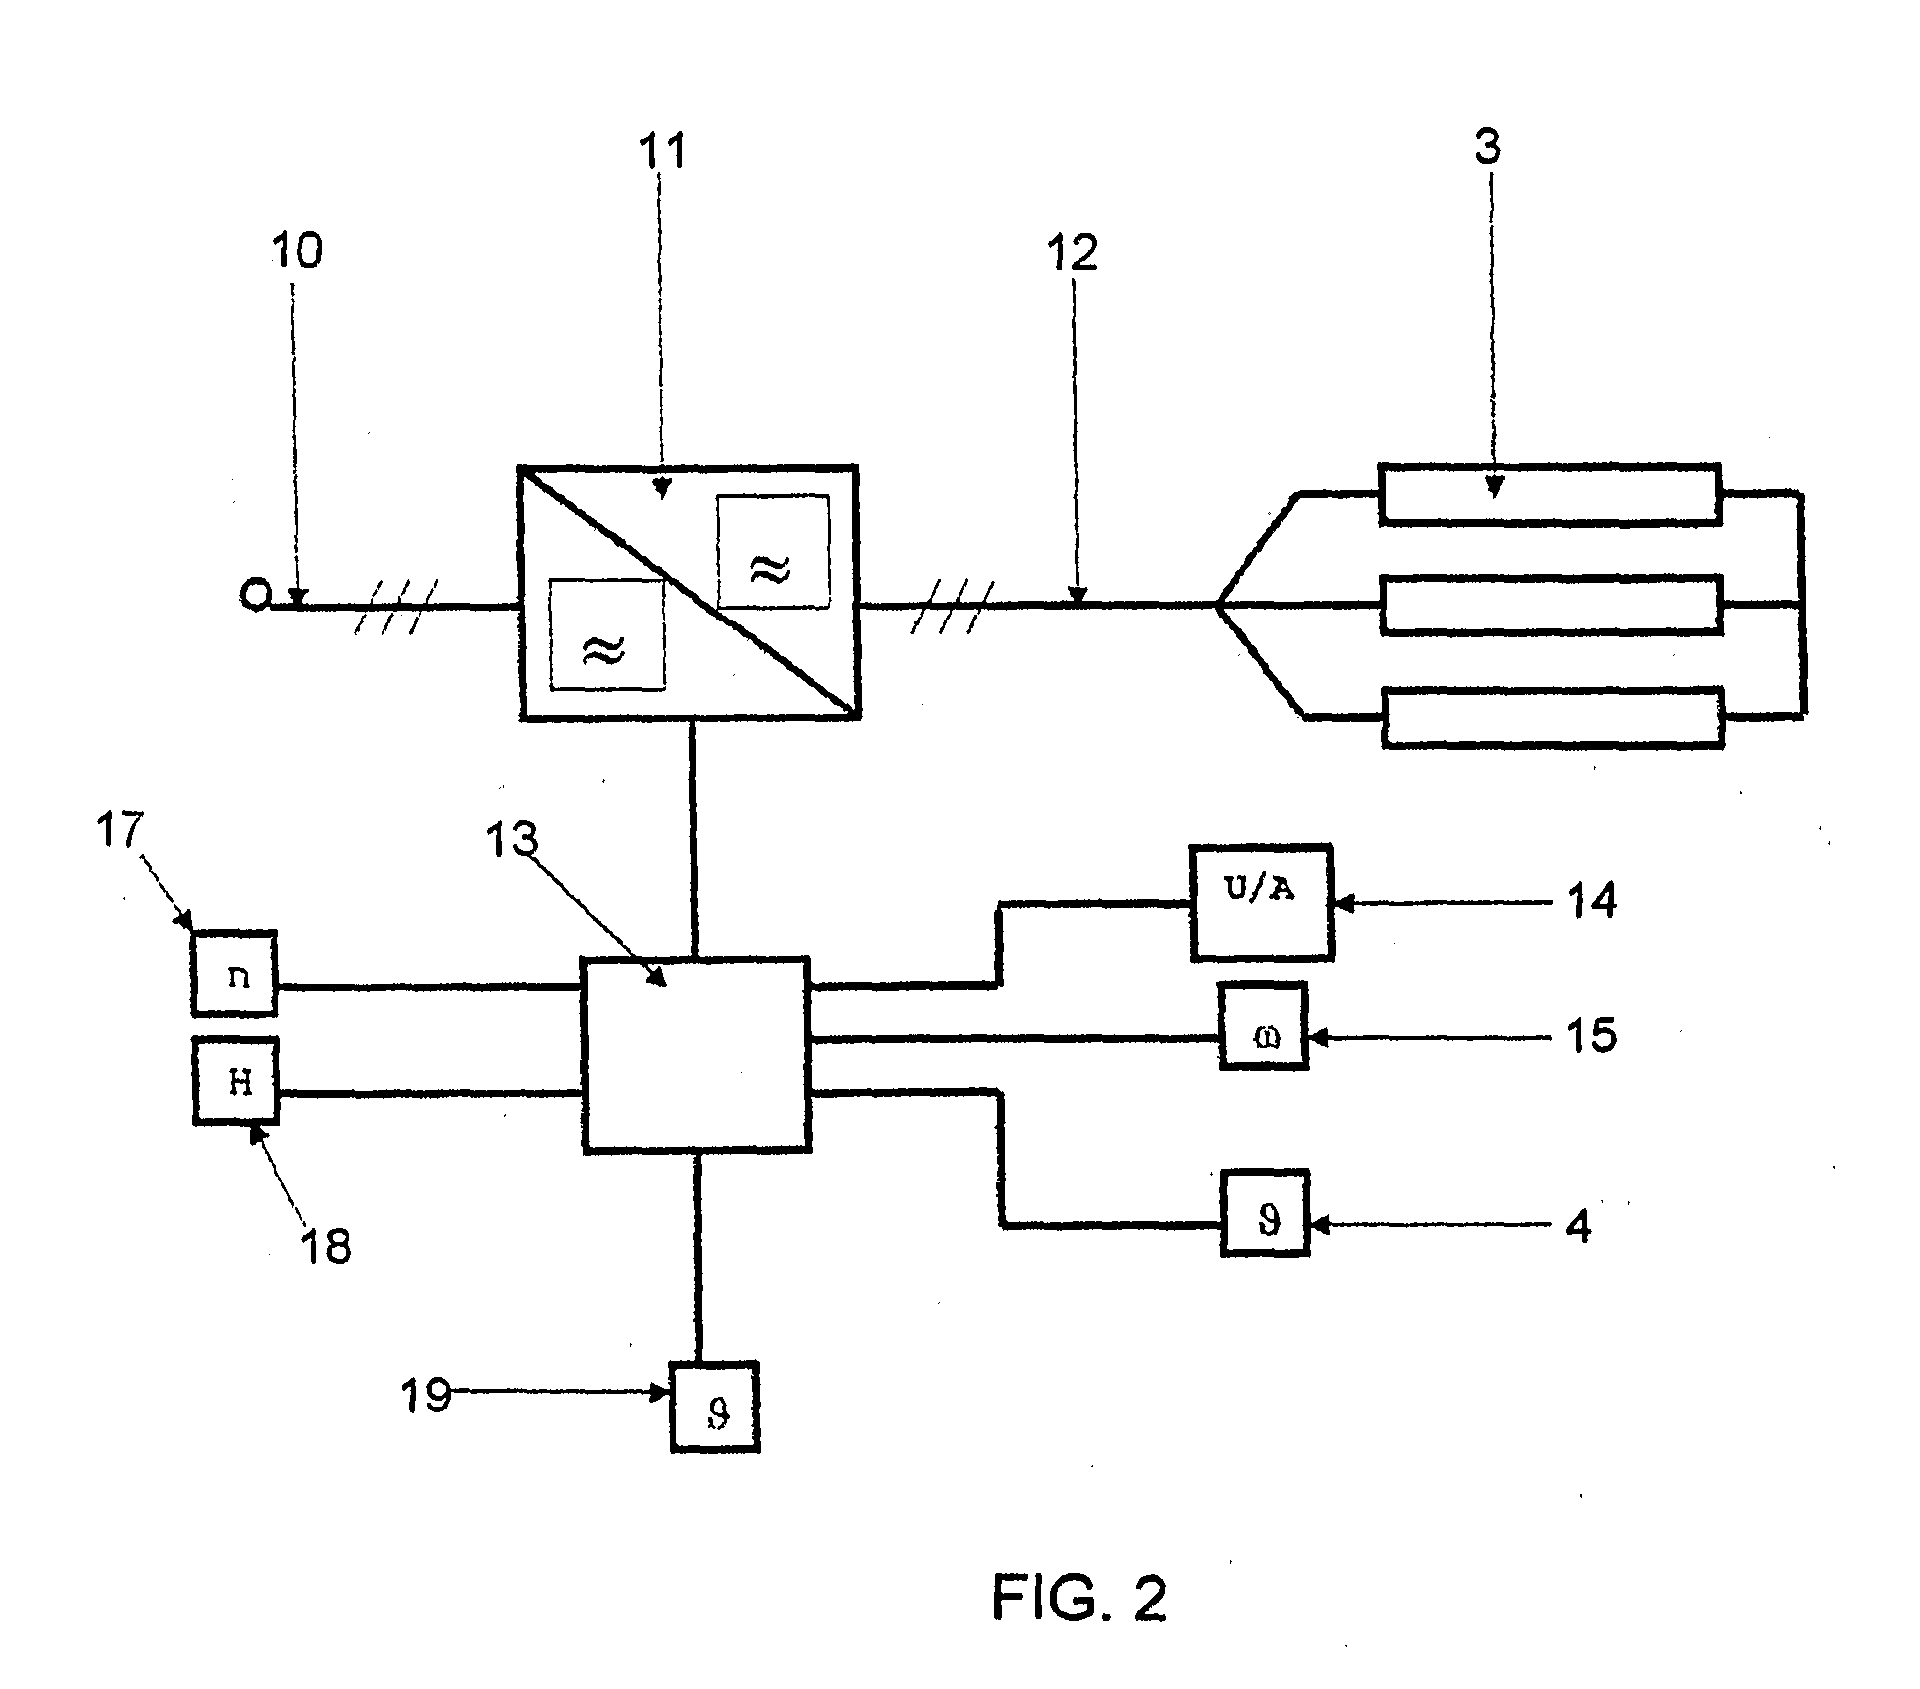 Method and Means for Controlling Power Delivery to an Equipment for Counter-Acting Formation of Ice or for Removing Snow/Ice on a Constructional Element